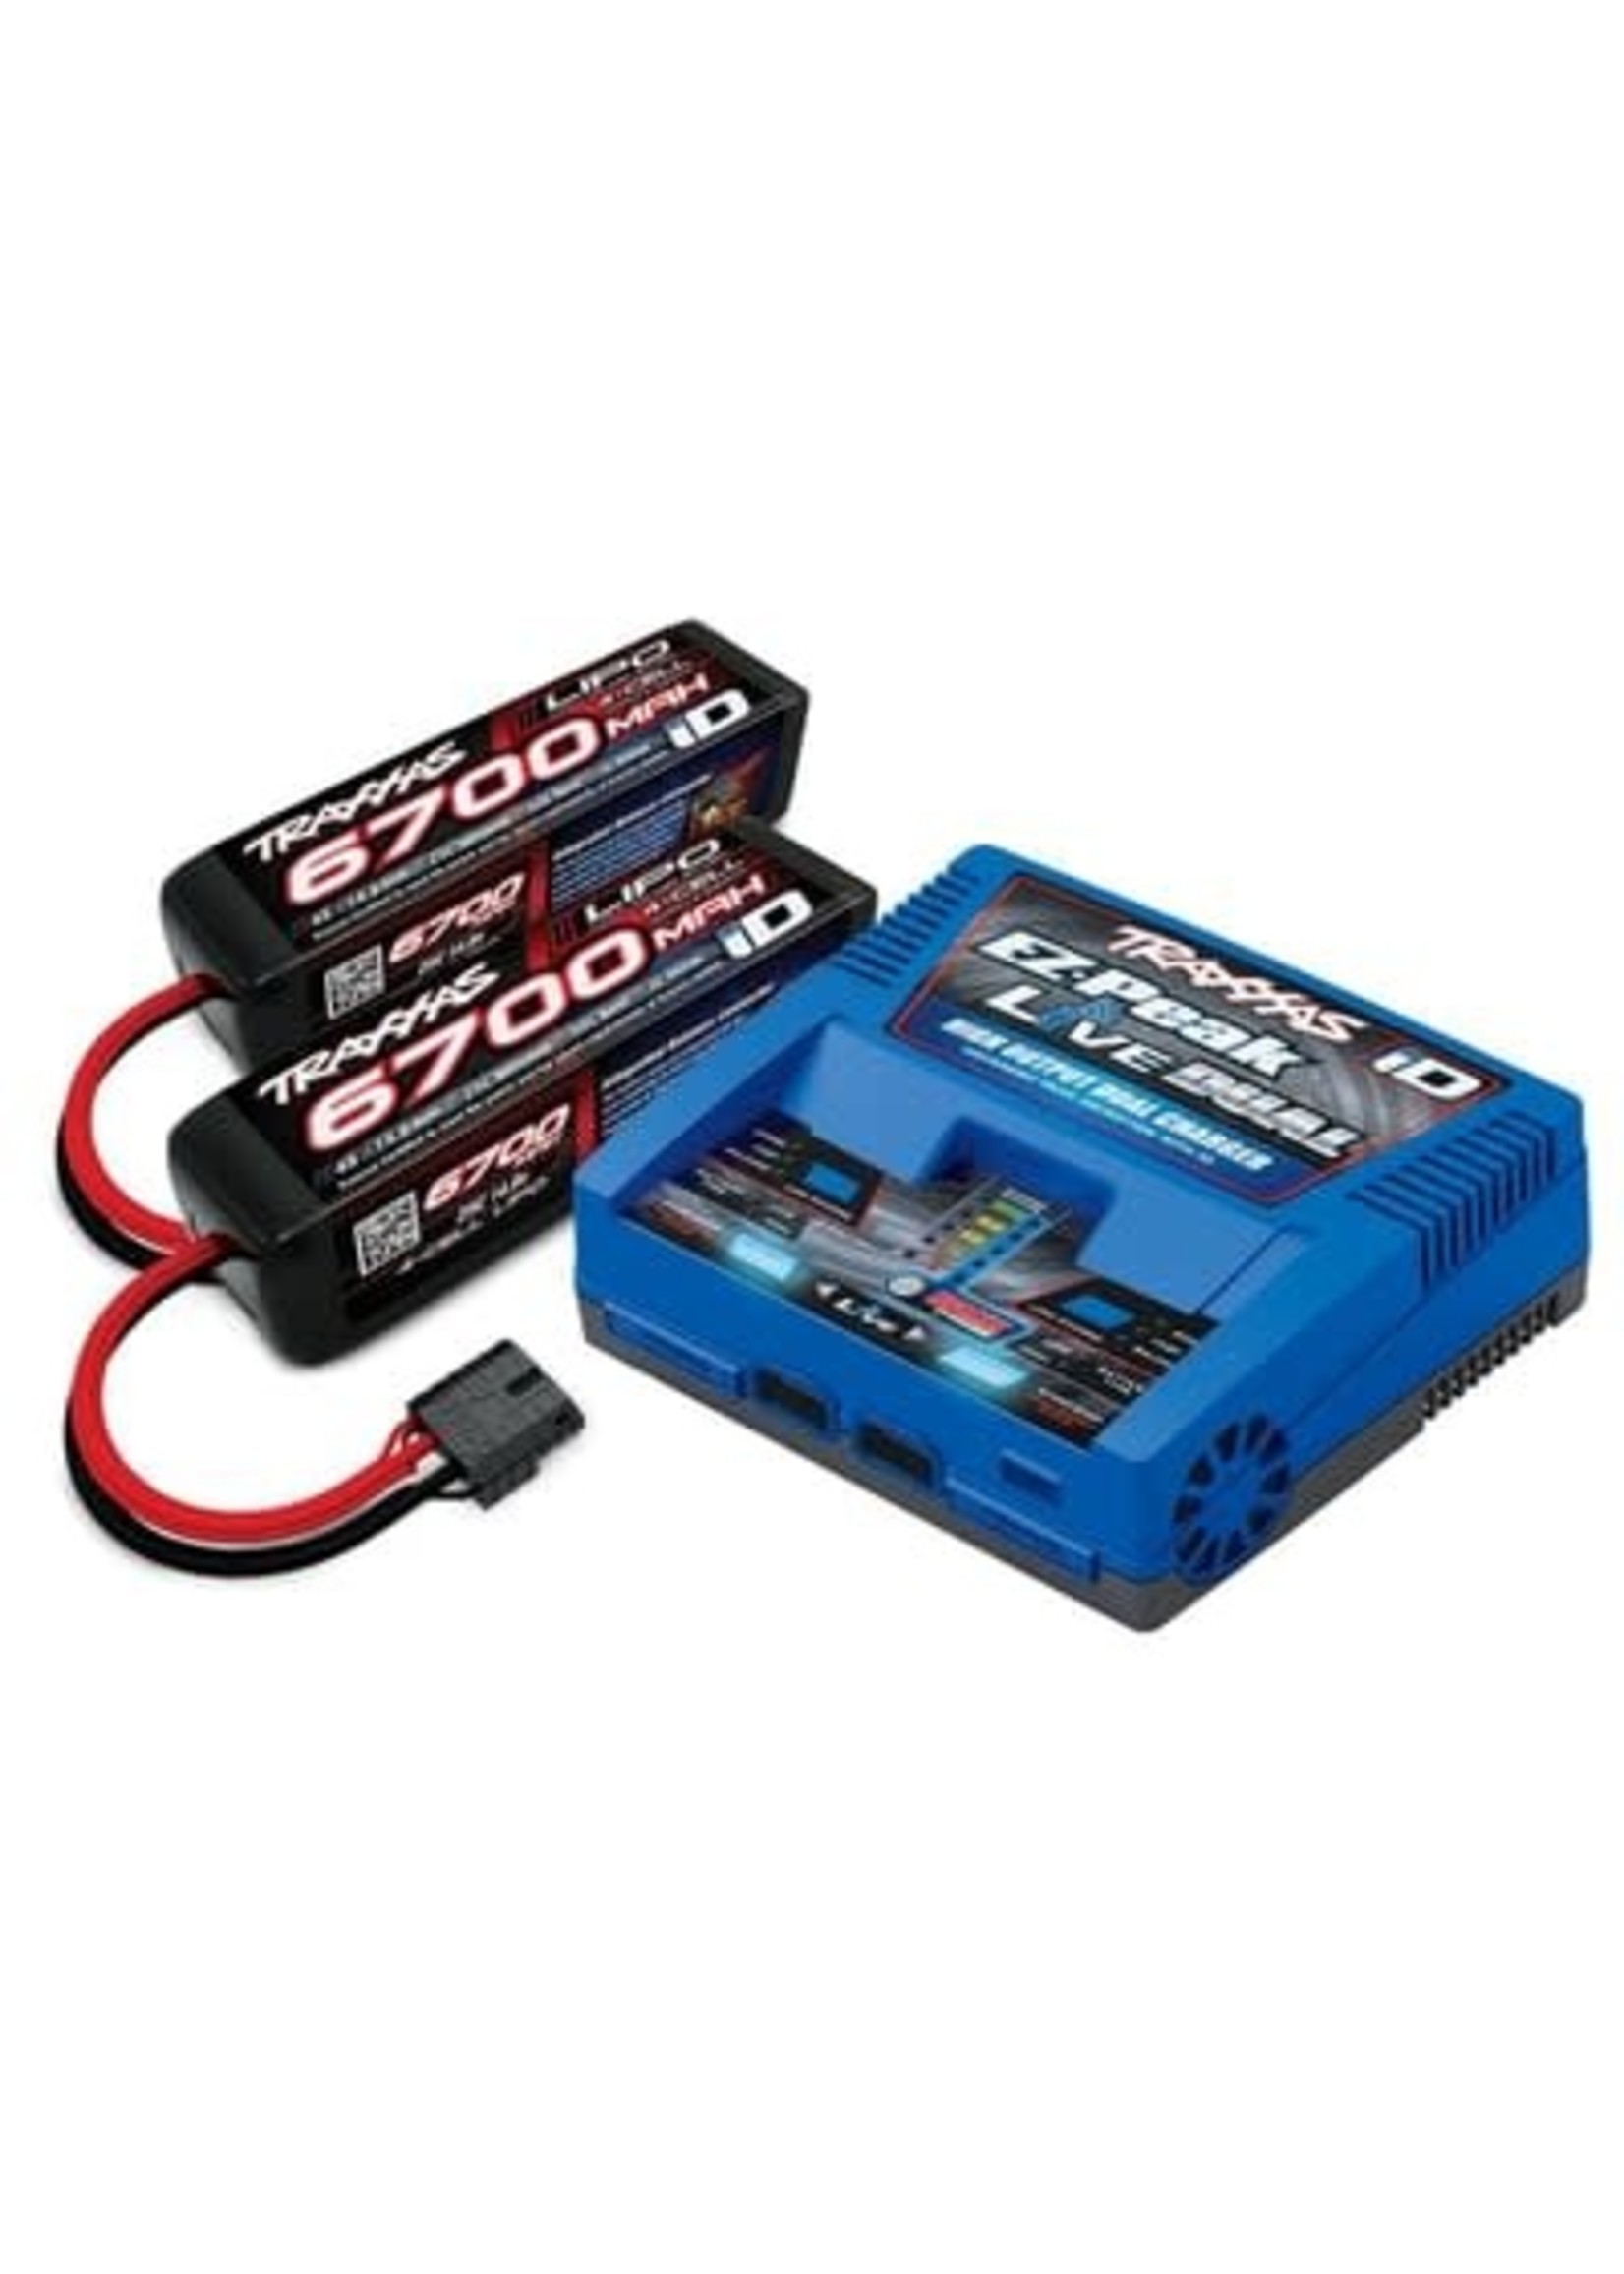 Traxxas 2997 Battery/charger completer pack (includes #2973 Dual iD charger (1), #2890X 6700mAh 14.8V 4-cell 25C LiPo battery (2))